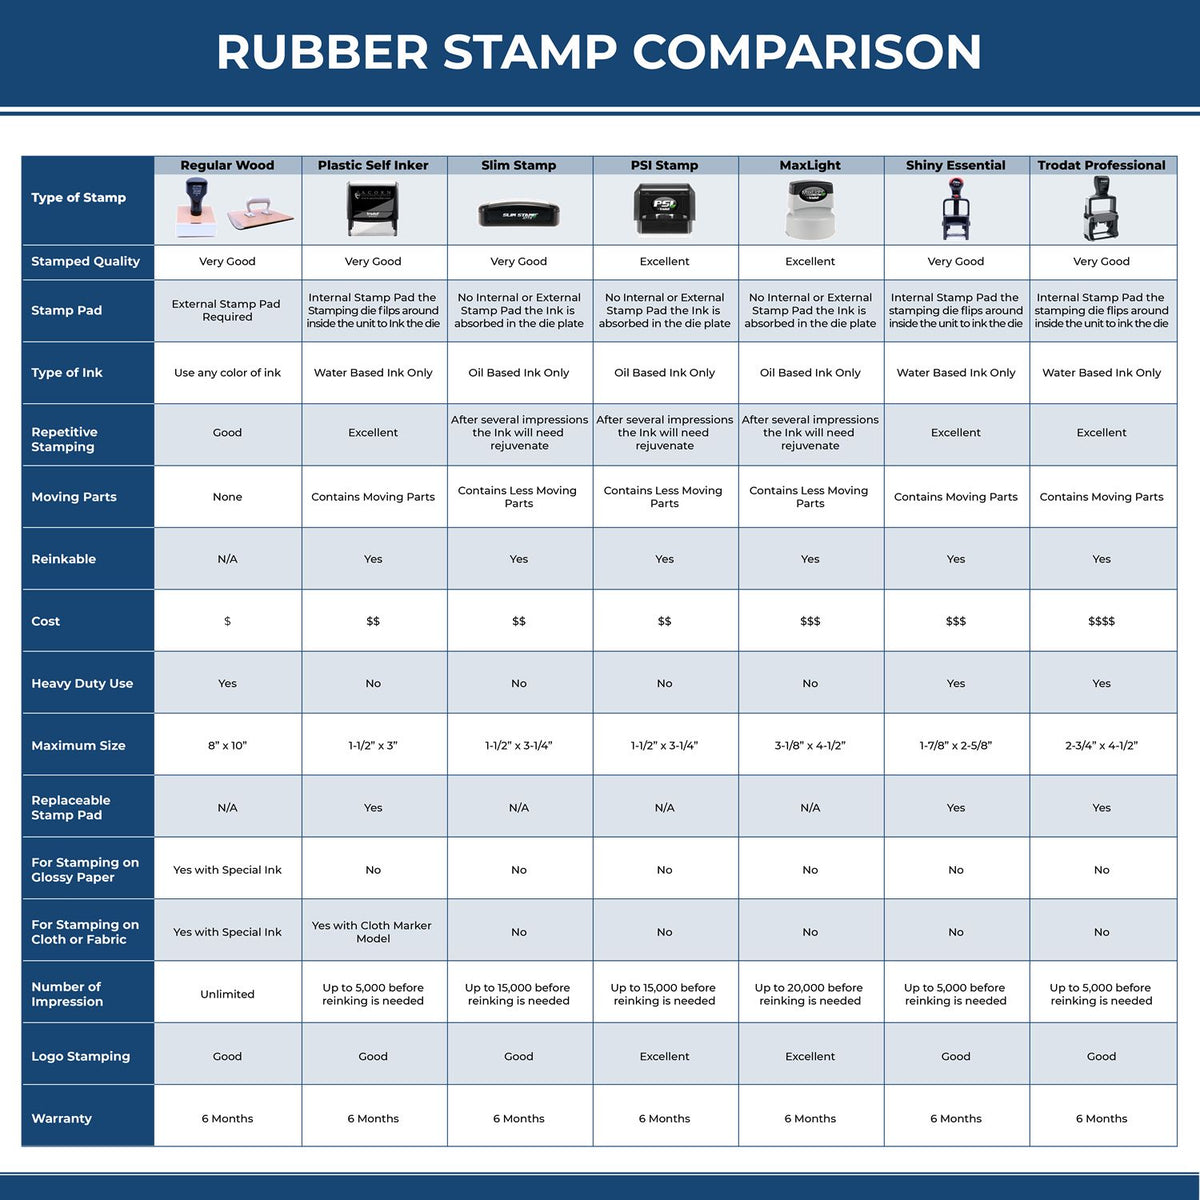 A comparison chart for the different types of mount models available for the PSI California Notary Stamp.